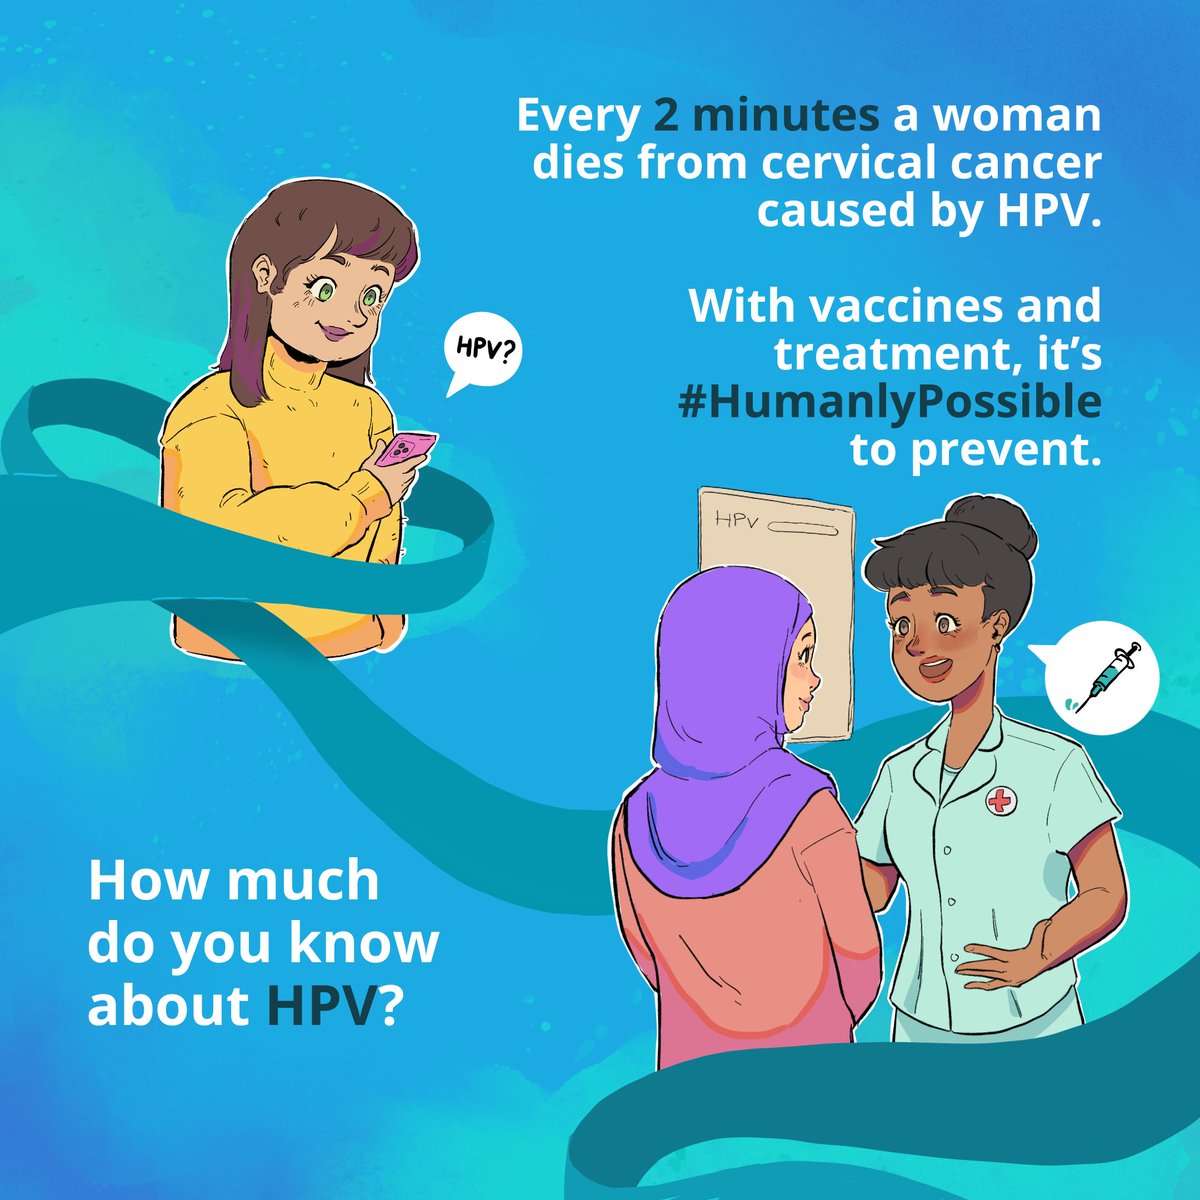 Every 2 minutes, a woman dies from cervical cancer caused by HPV.
Send “HPV” in a private message to @UreportNigeria  messenger, Telegram, and WhatsApp +234 912 091 7615 to learn more about the HPV vaccine in a safe space.
#UReportNigeria
#HumanlyPossible